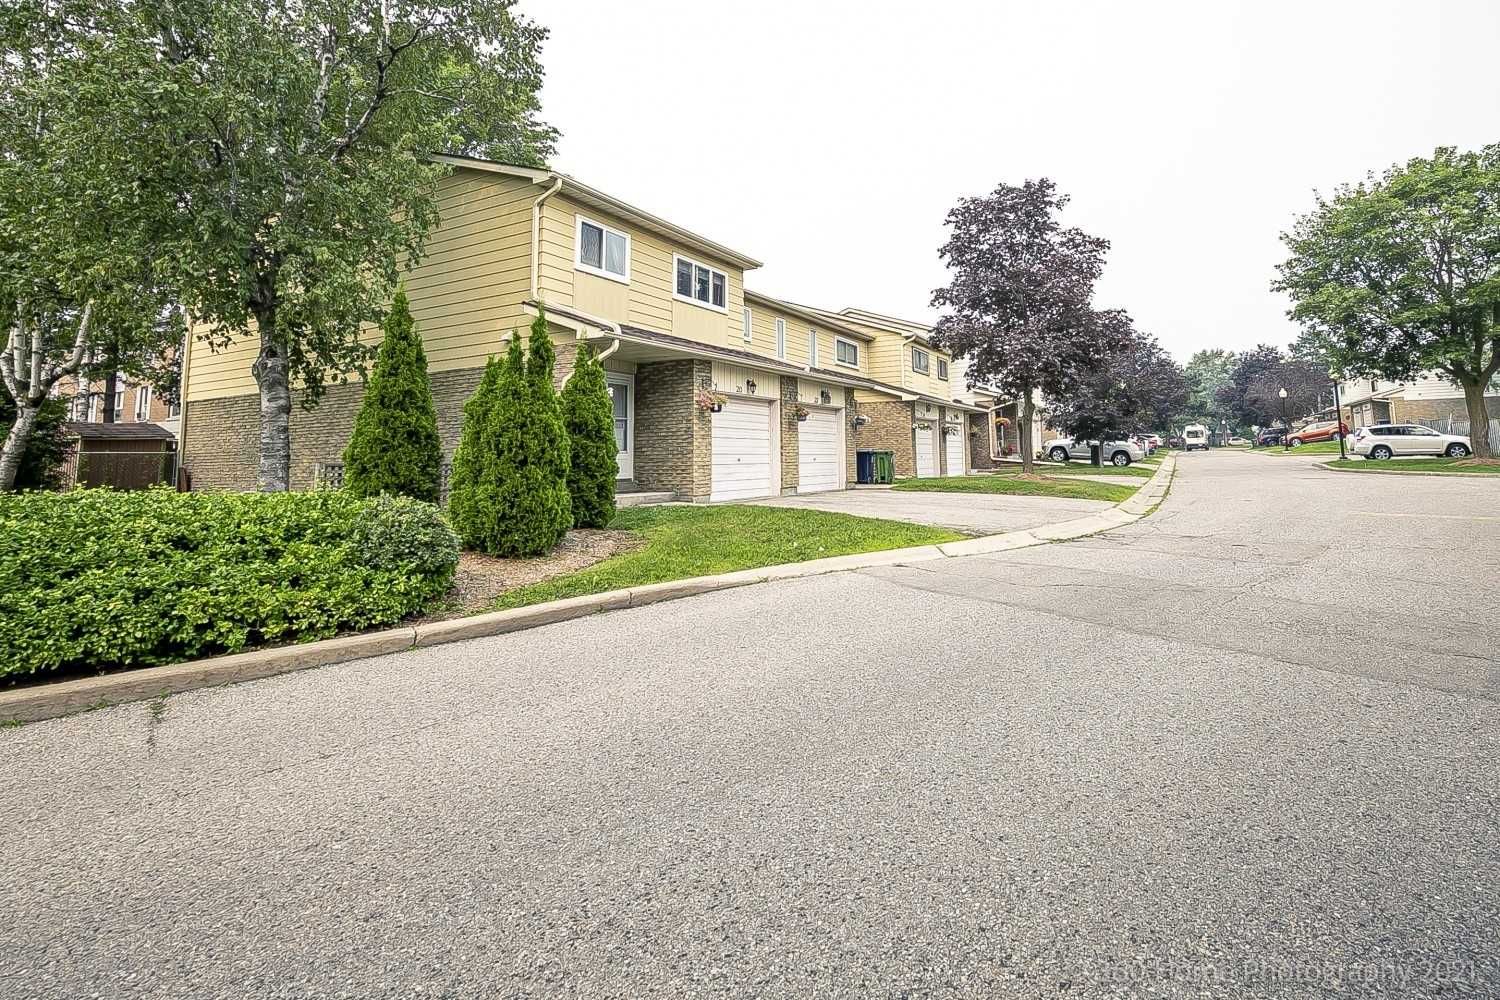 301 Washburn Way. 301 Washburn Way Townhomes is located in  Scarborough, Toronto - image #1 of 2